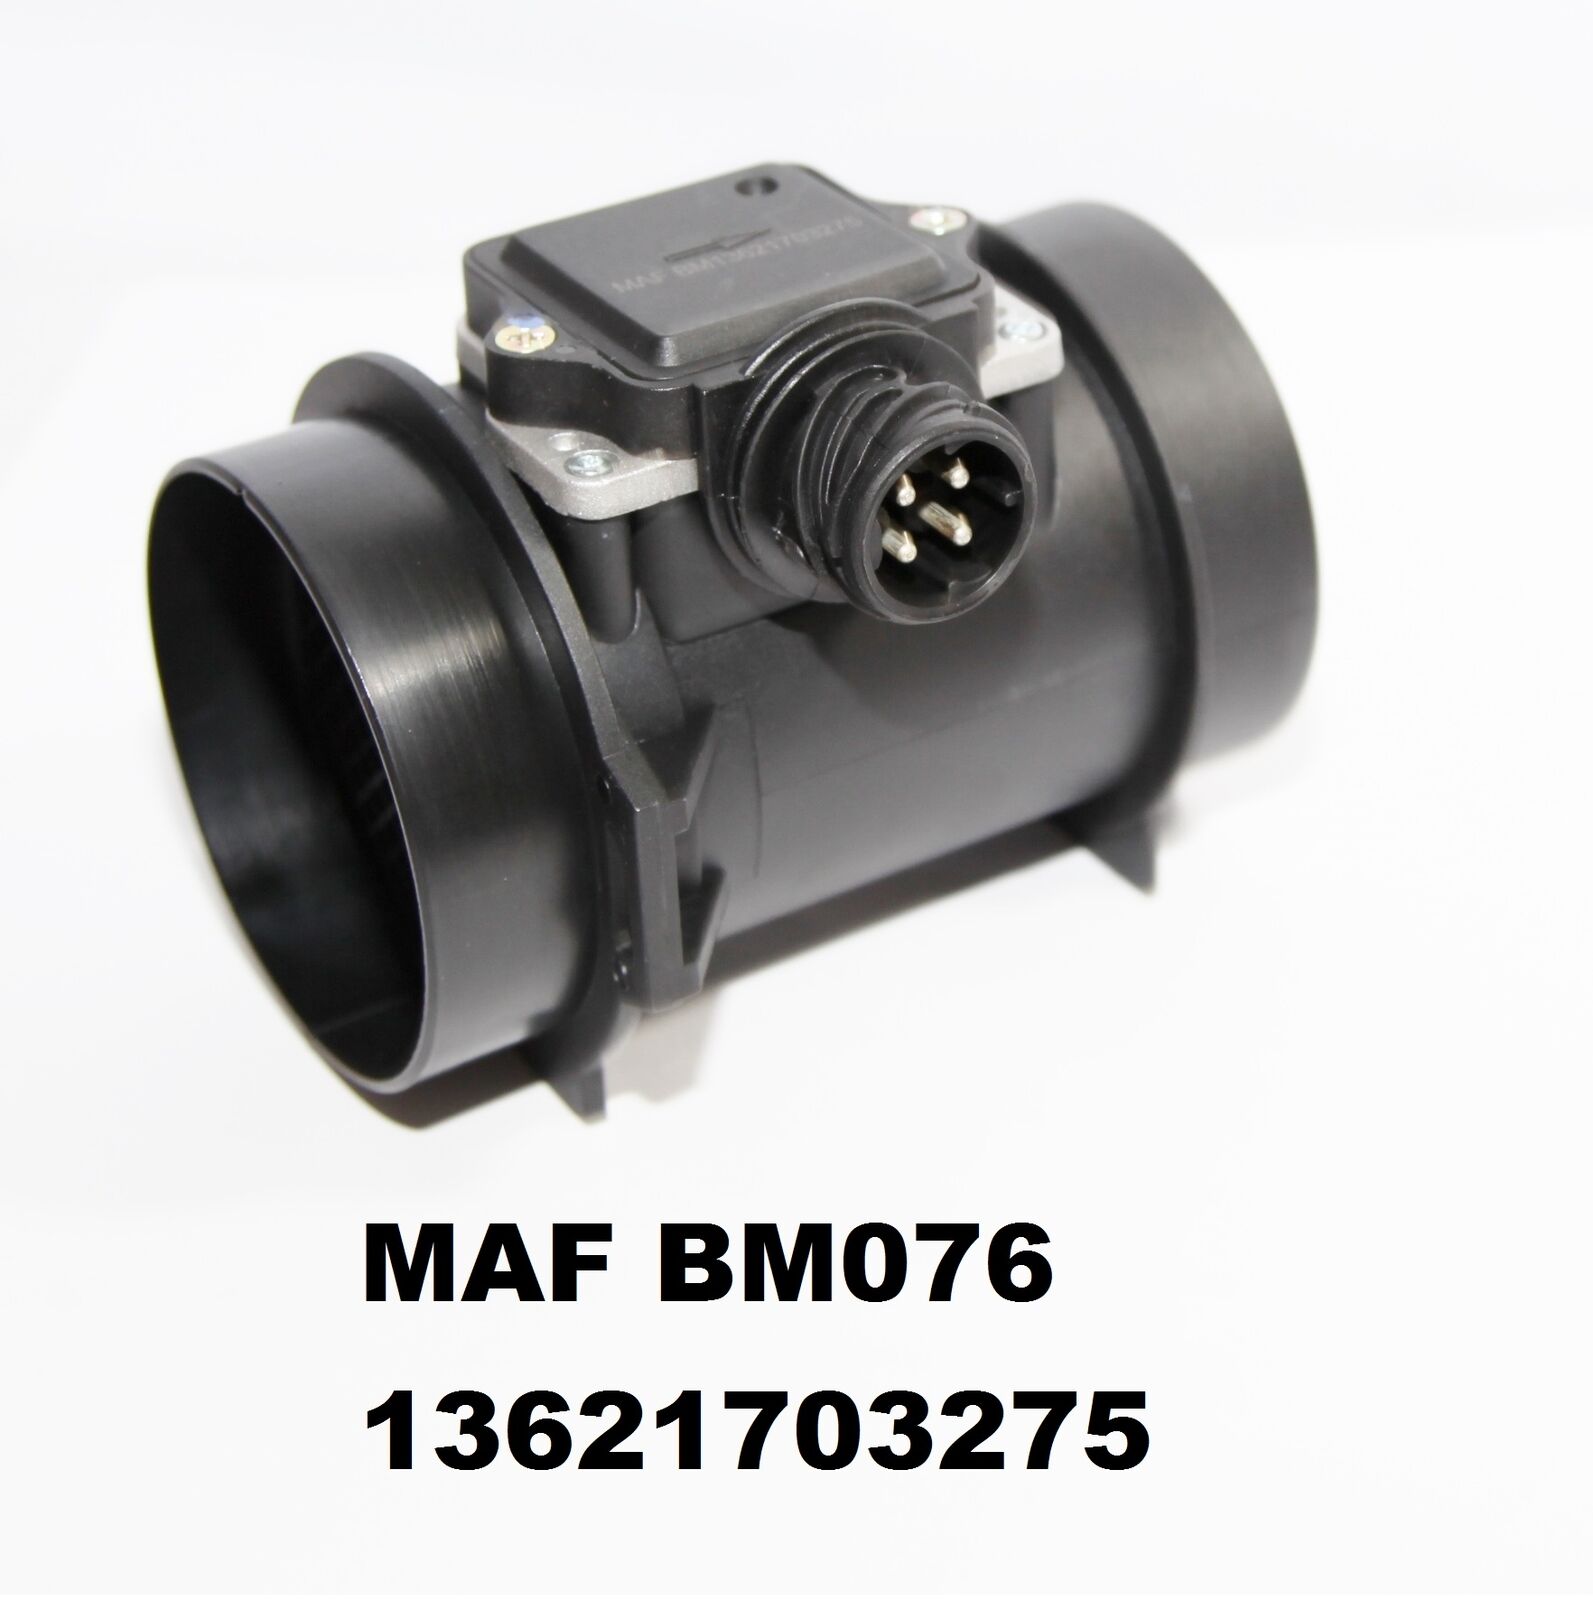 Mass Air Flow Sensor for BMW 98-99 323iC 323iS 96-98 328i 96-99 328iC 328iS